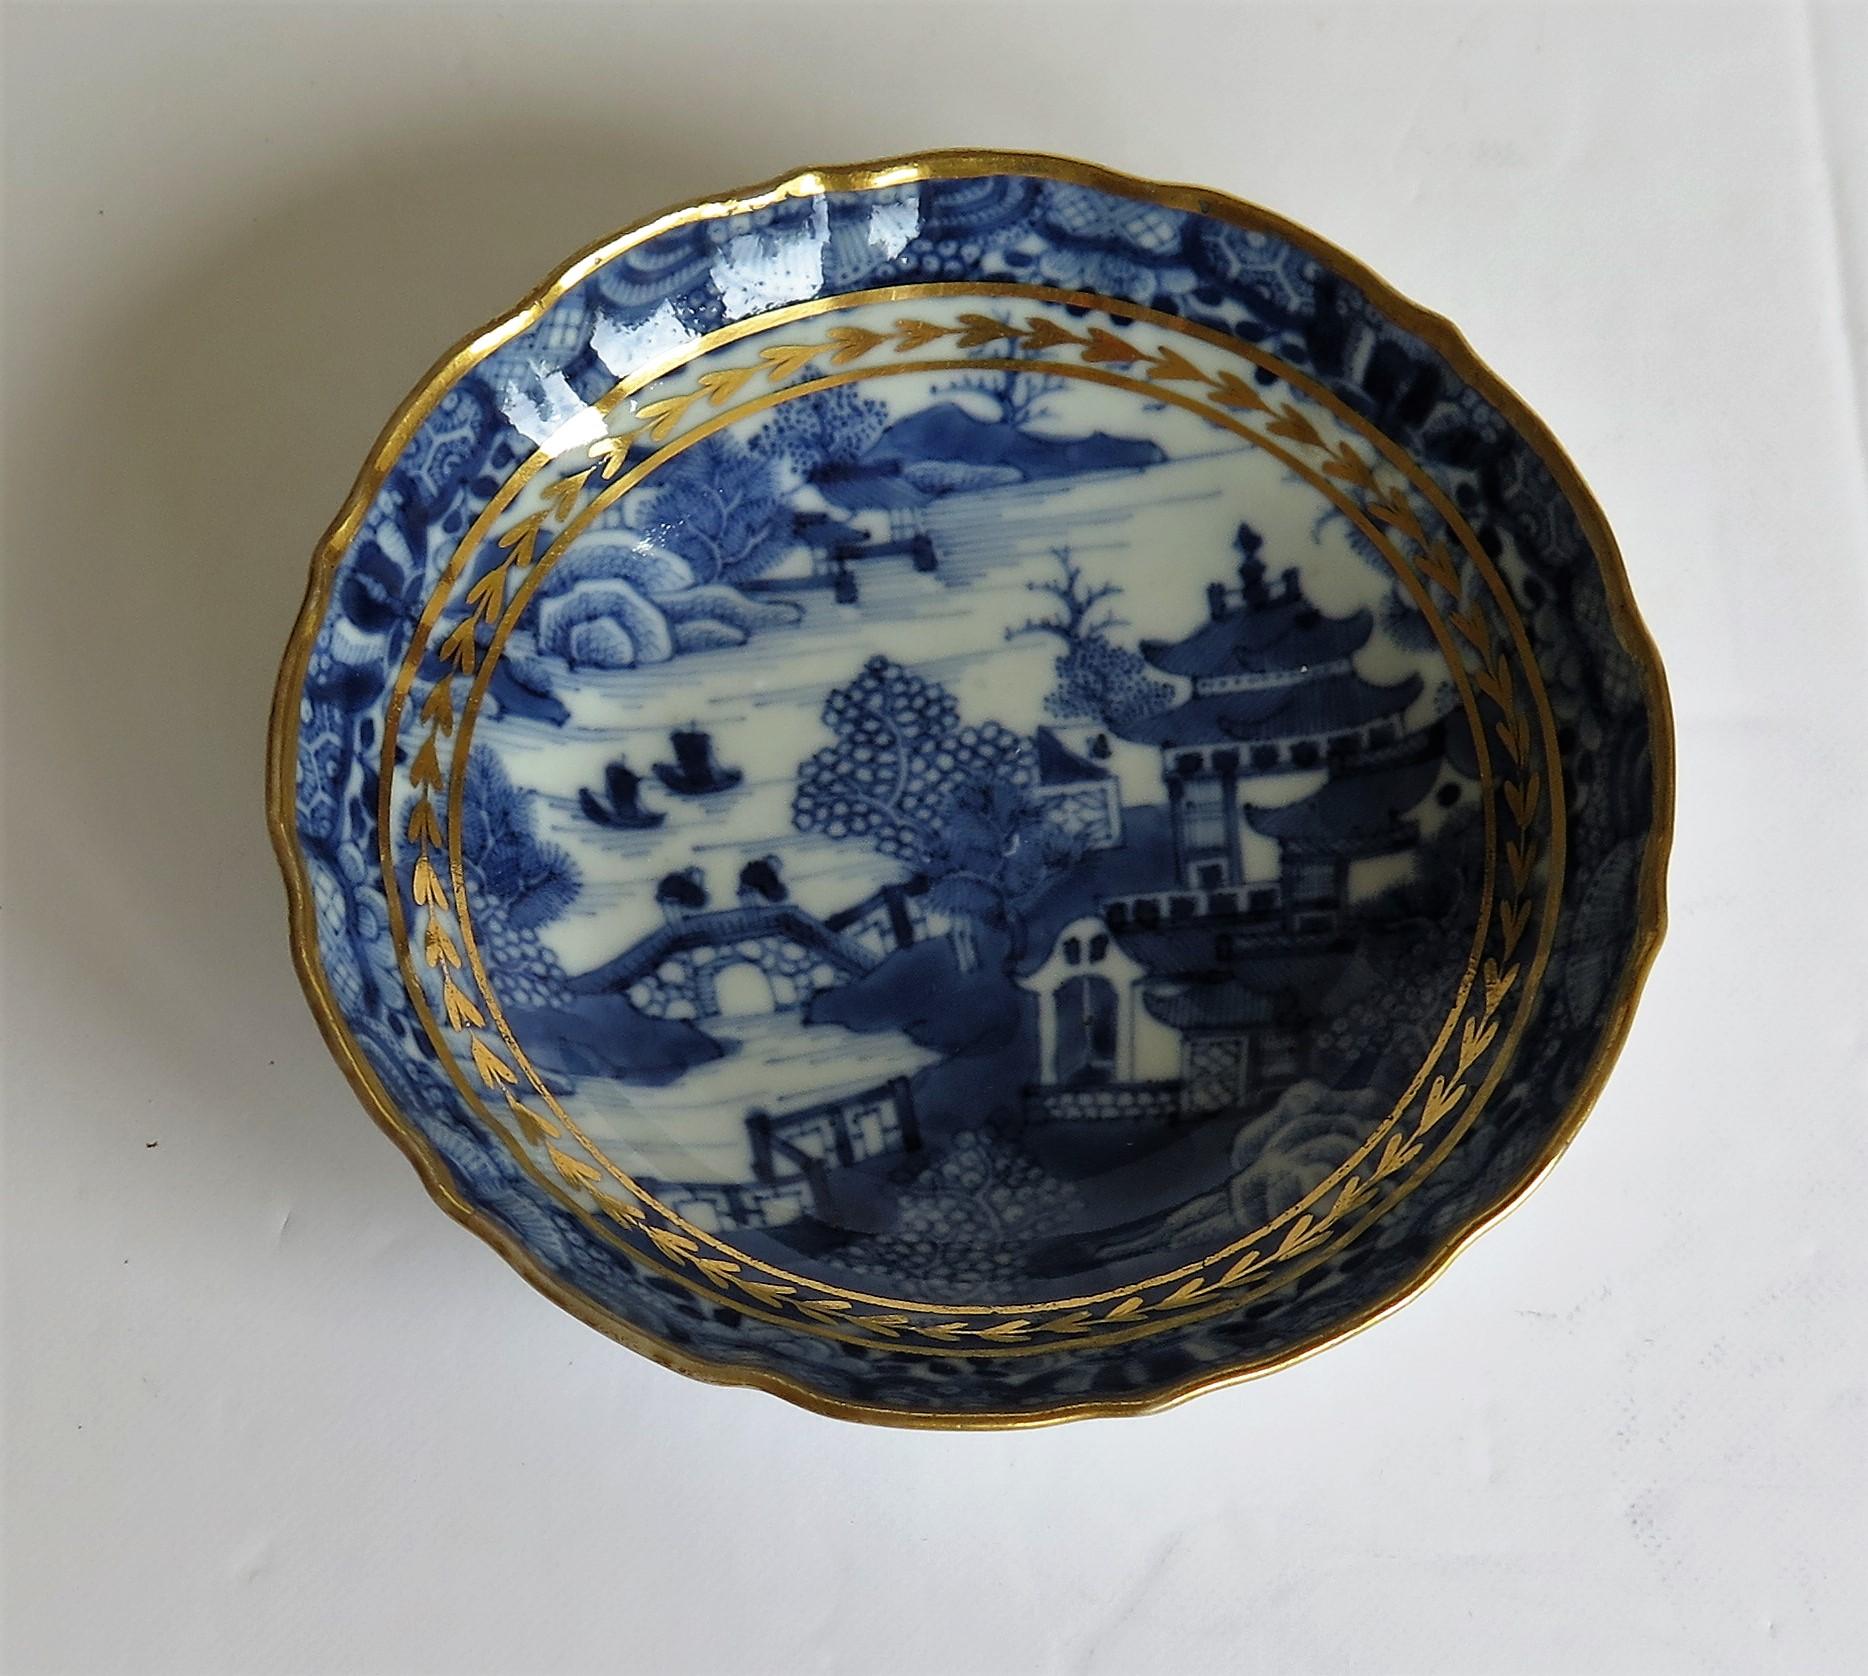 18th Century Chinese Export Porcelain Berry Bowl or Dish Blue and White Gilded, Qing